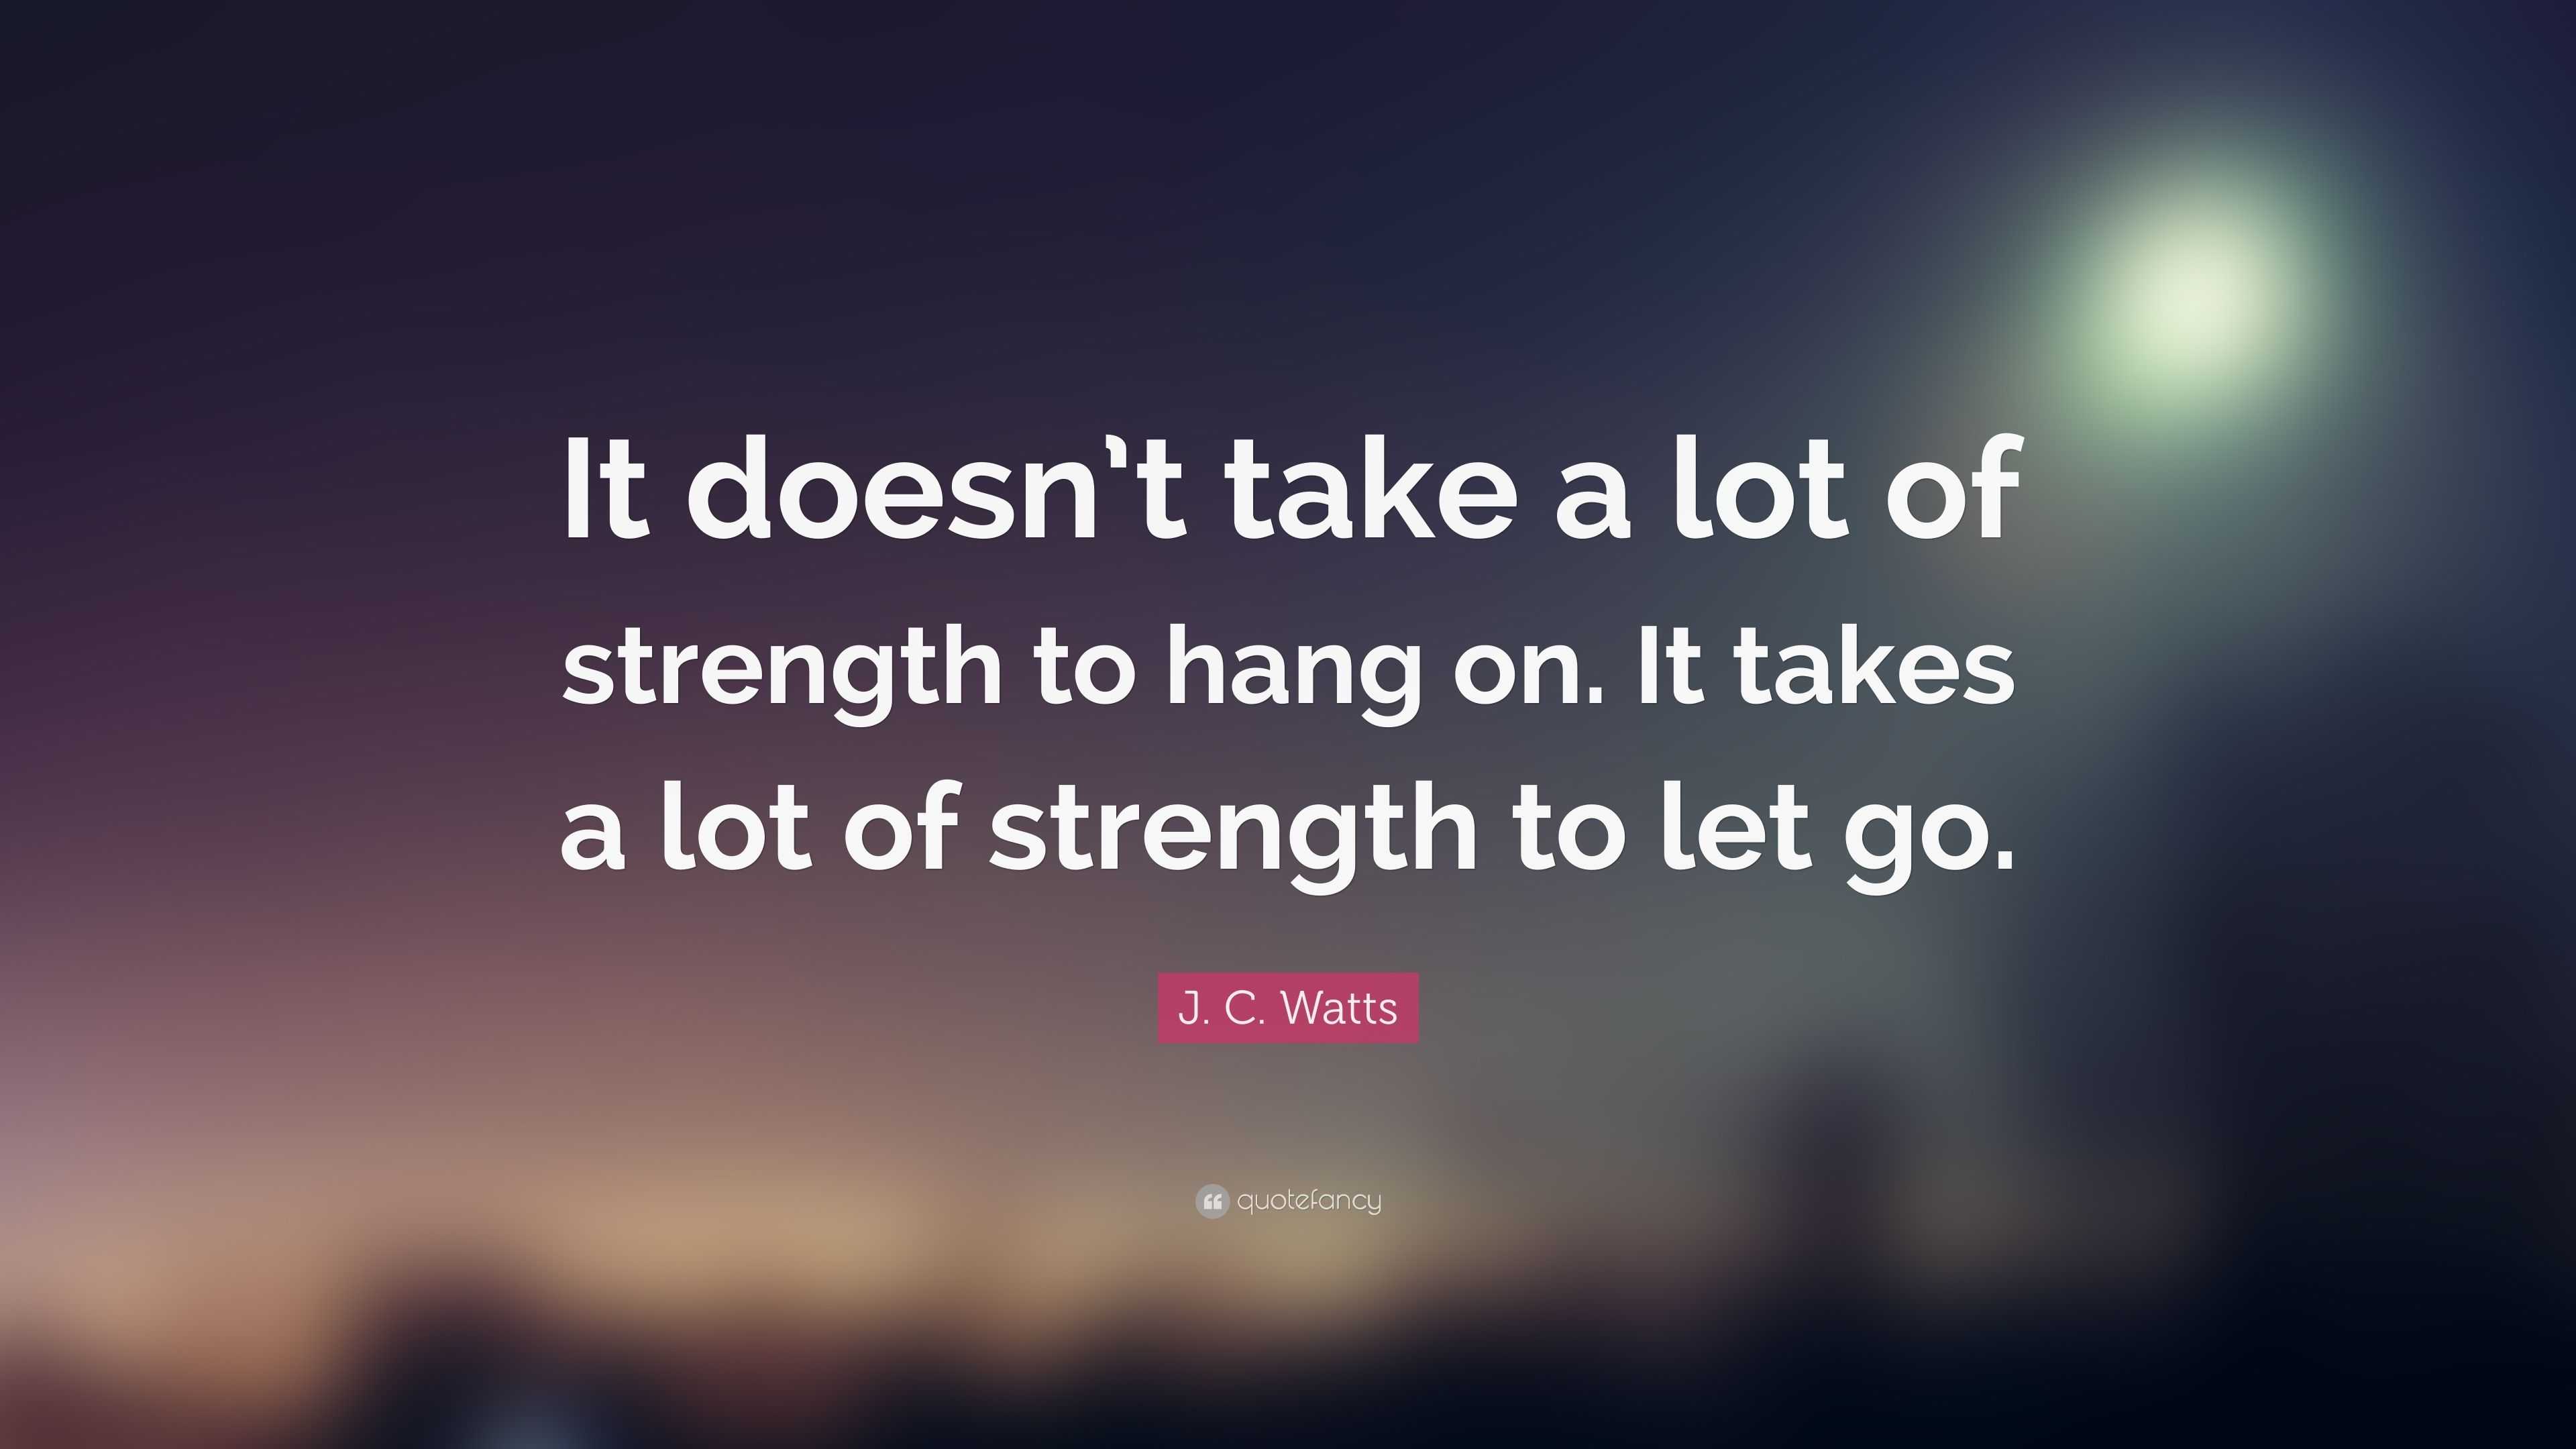 J C Watts Quote It Doesn T Take A Lot Of Strength To Hang On It Takes